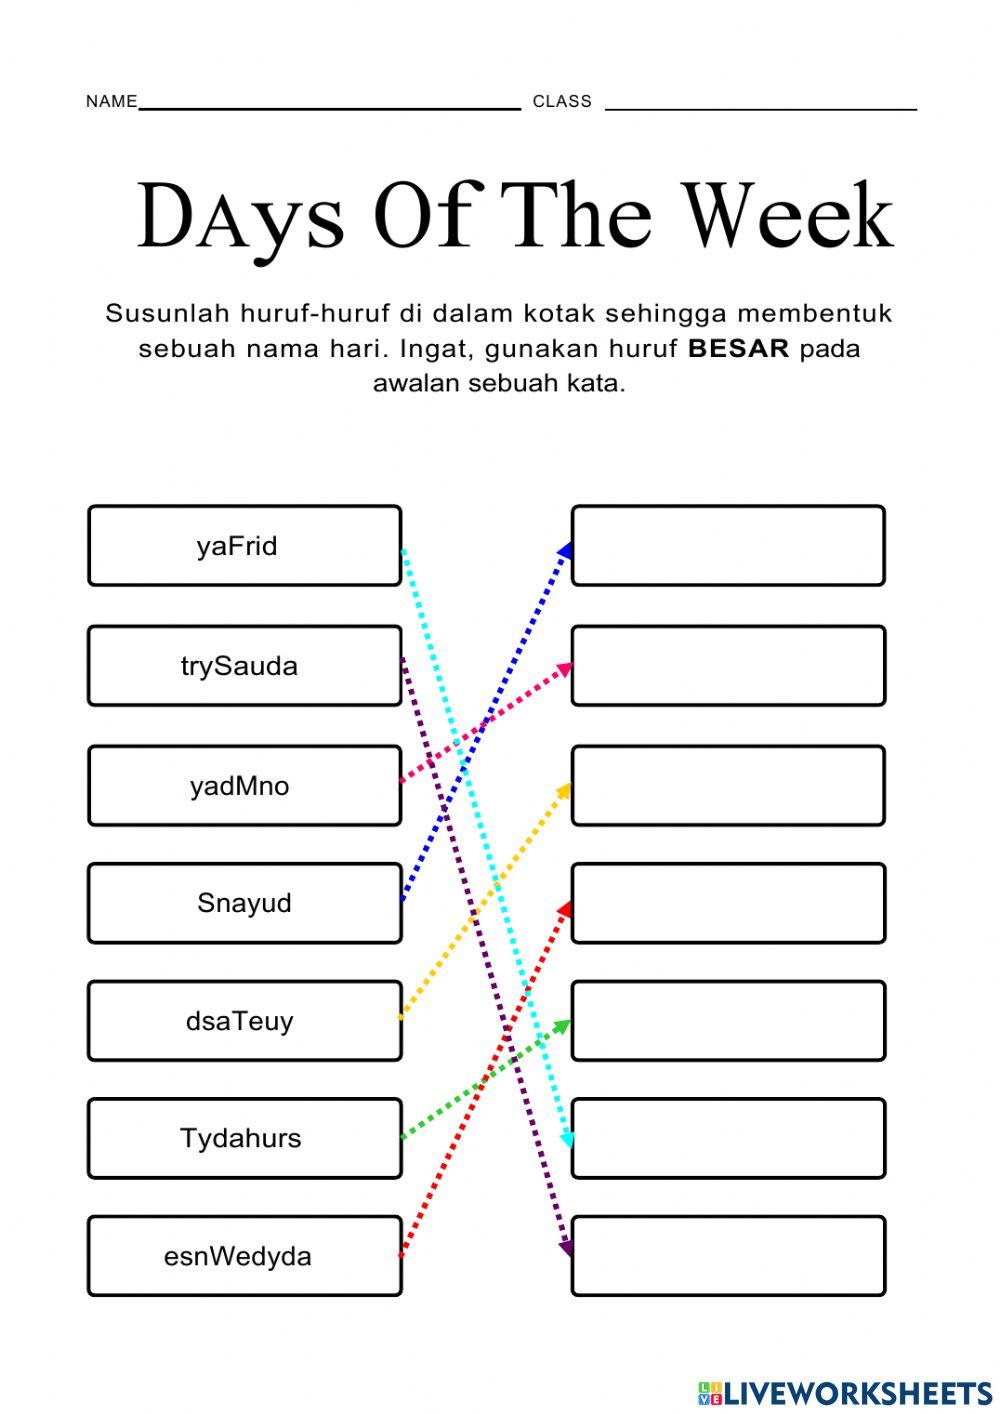 Days of the week and have-has